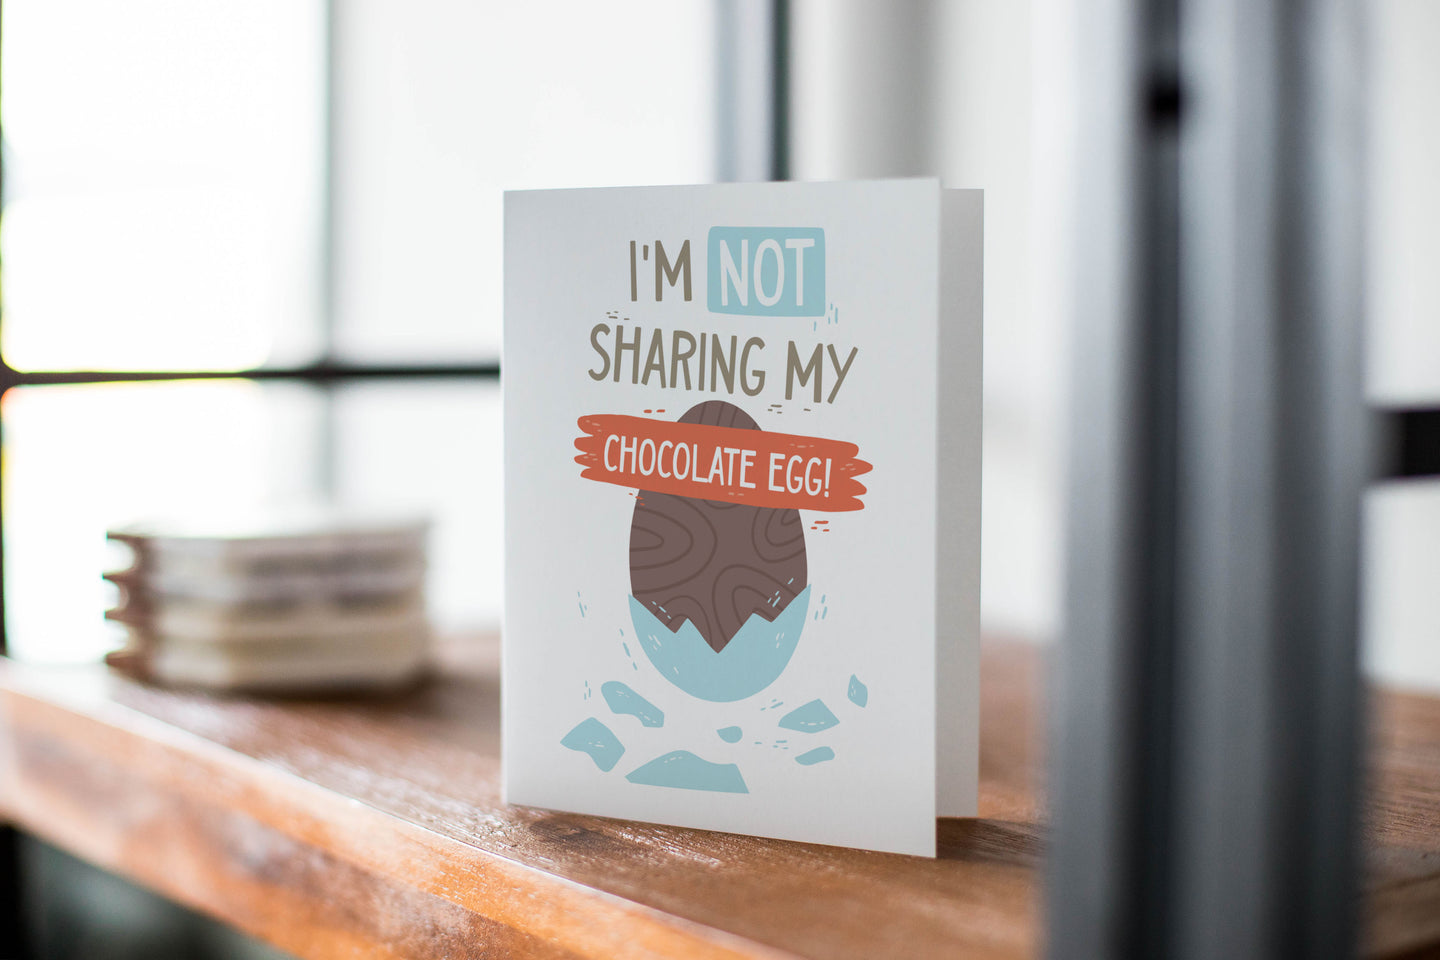 A card on a wood tabletop with an object in the background that is out of focus. The card features an illustrated chocolate Easter egg with the words “I’m not sharing my chocolate egg!”